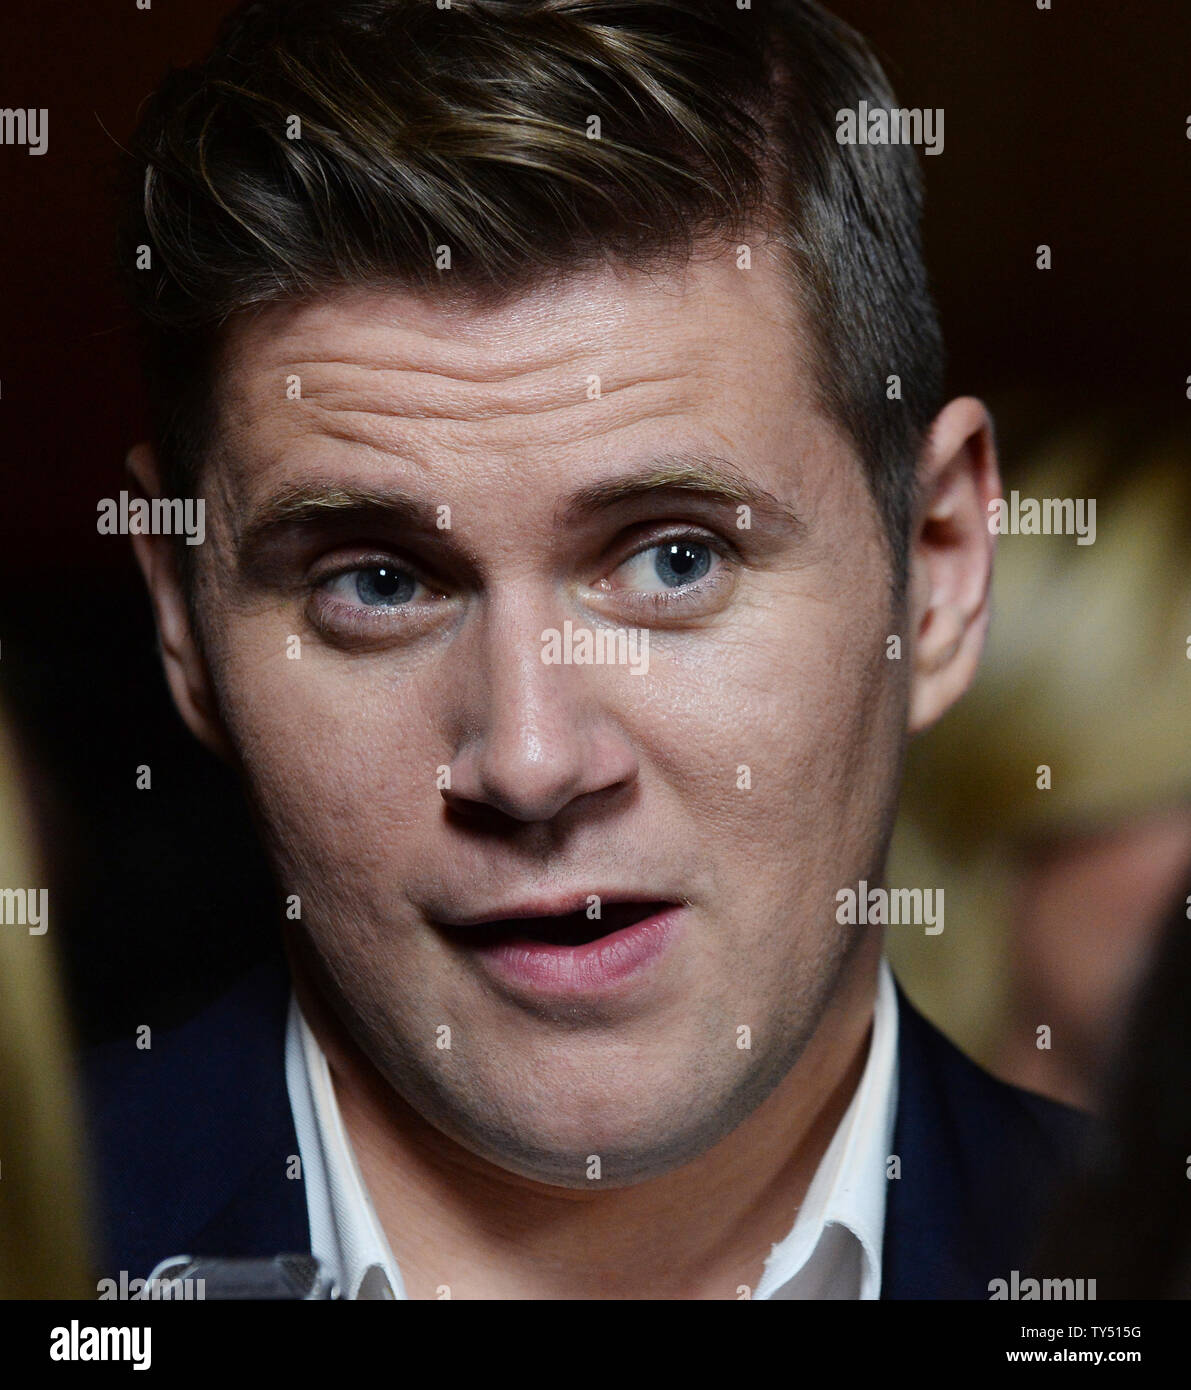 Cast member Allen Leech attends the premiere of the biographical motion picture war drama 'The Imitation Game' at the Directors Guild of America (DGA) in Los Angeles on November 10, 2014. Storyline: English mathematician and logician, Alan Turing (Benedict Cumberbatch), helps crack the Enigma code in a nail-biting race against time during the darkest days of World War II.  UPI/Jim Ruymen Stock Photo